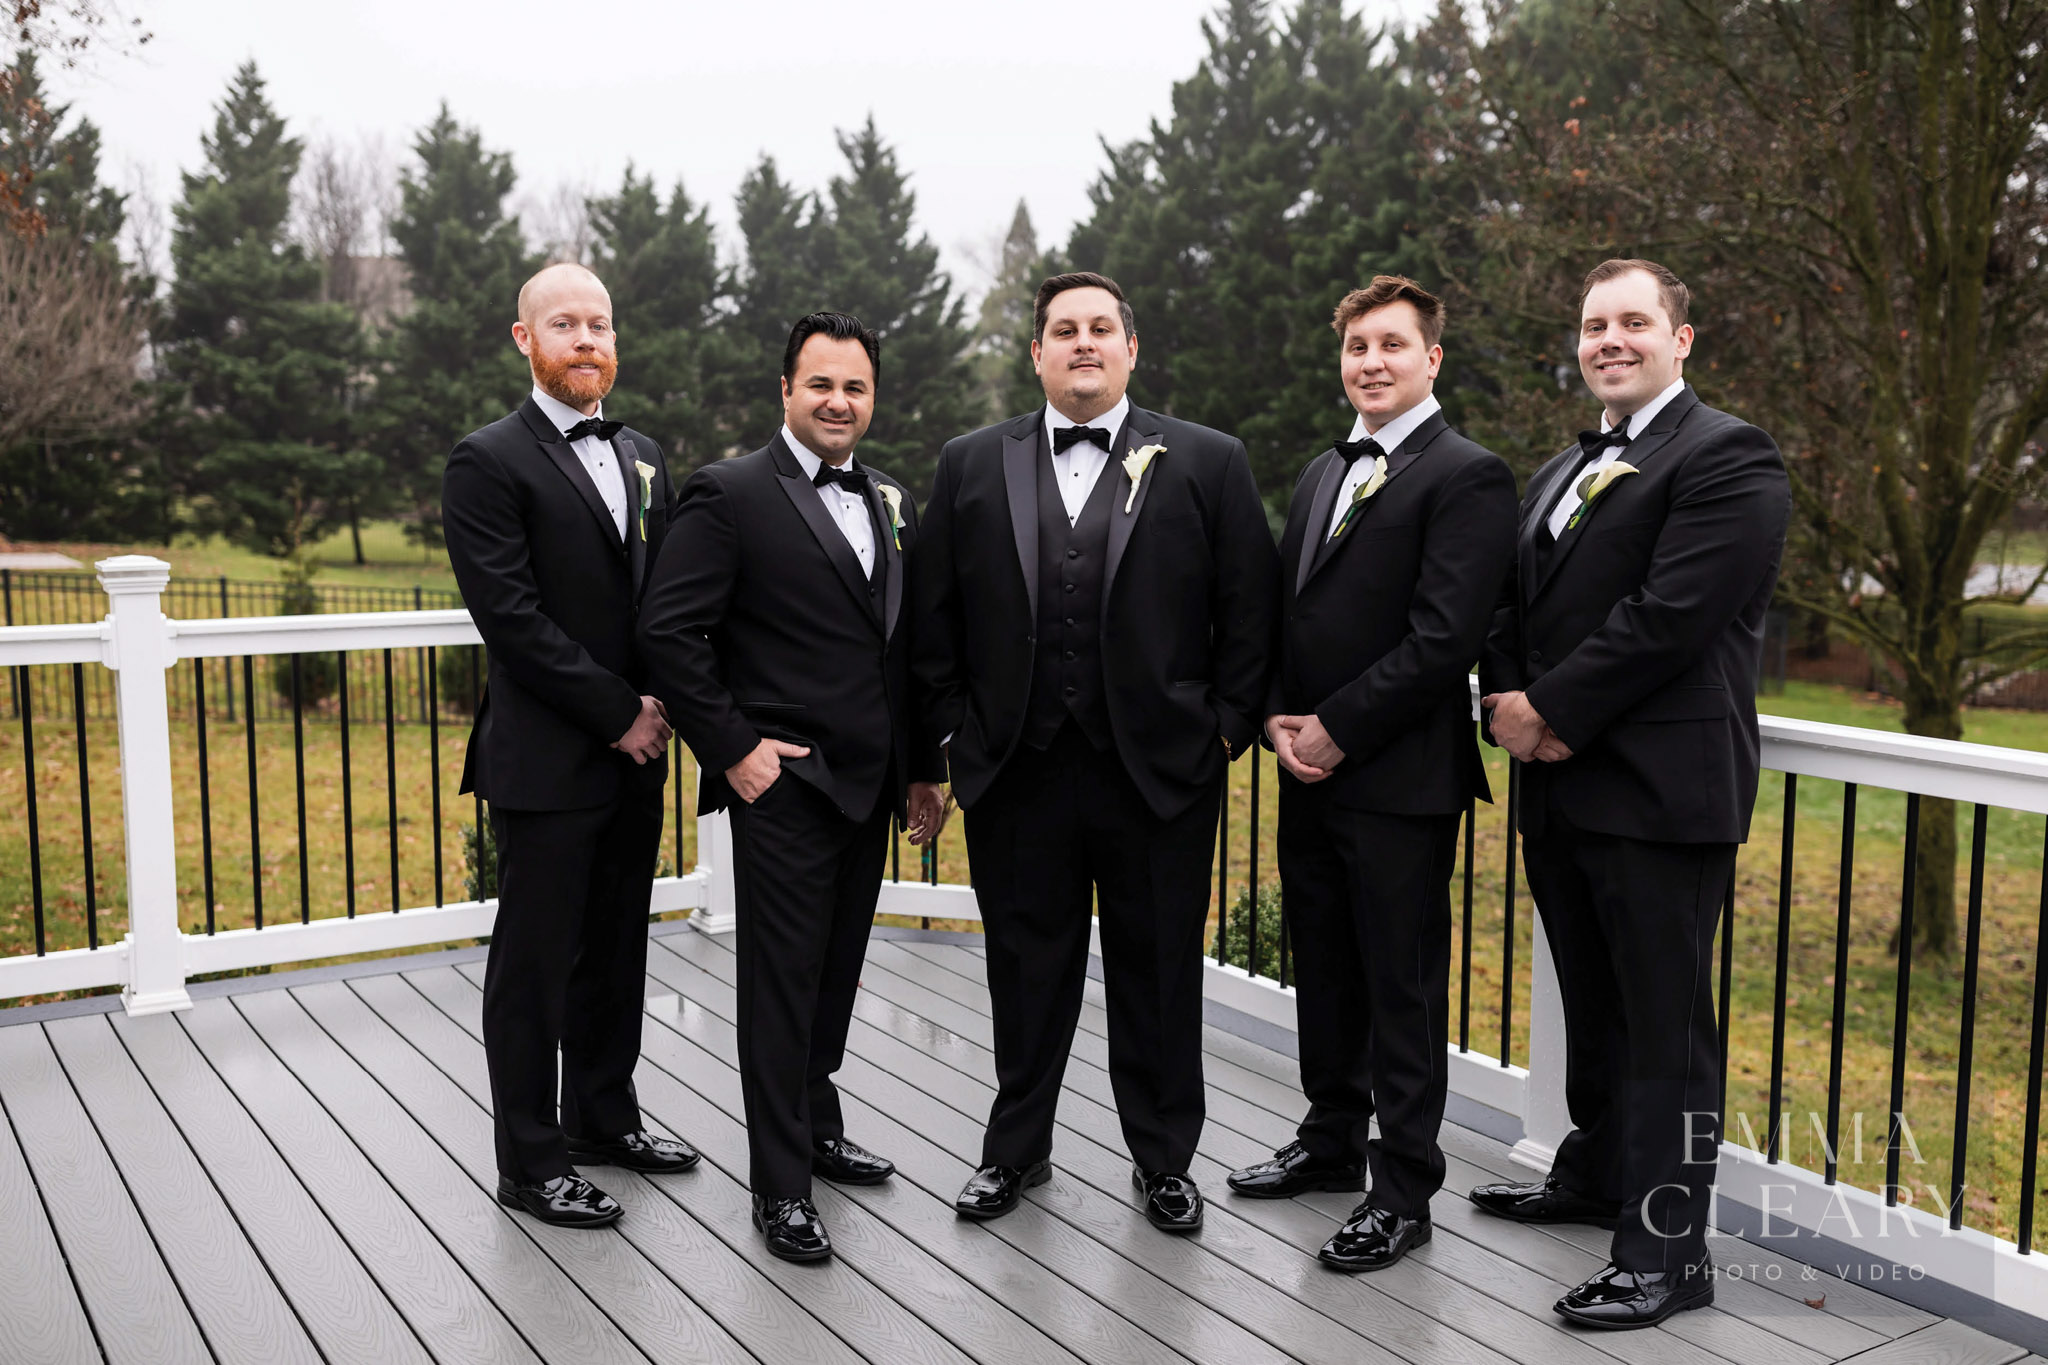 Outside image of the groom and groomsmen